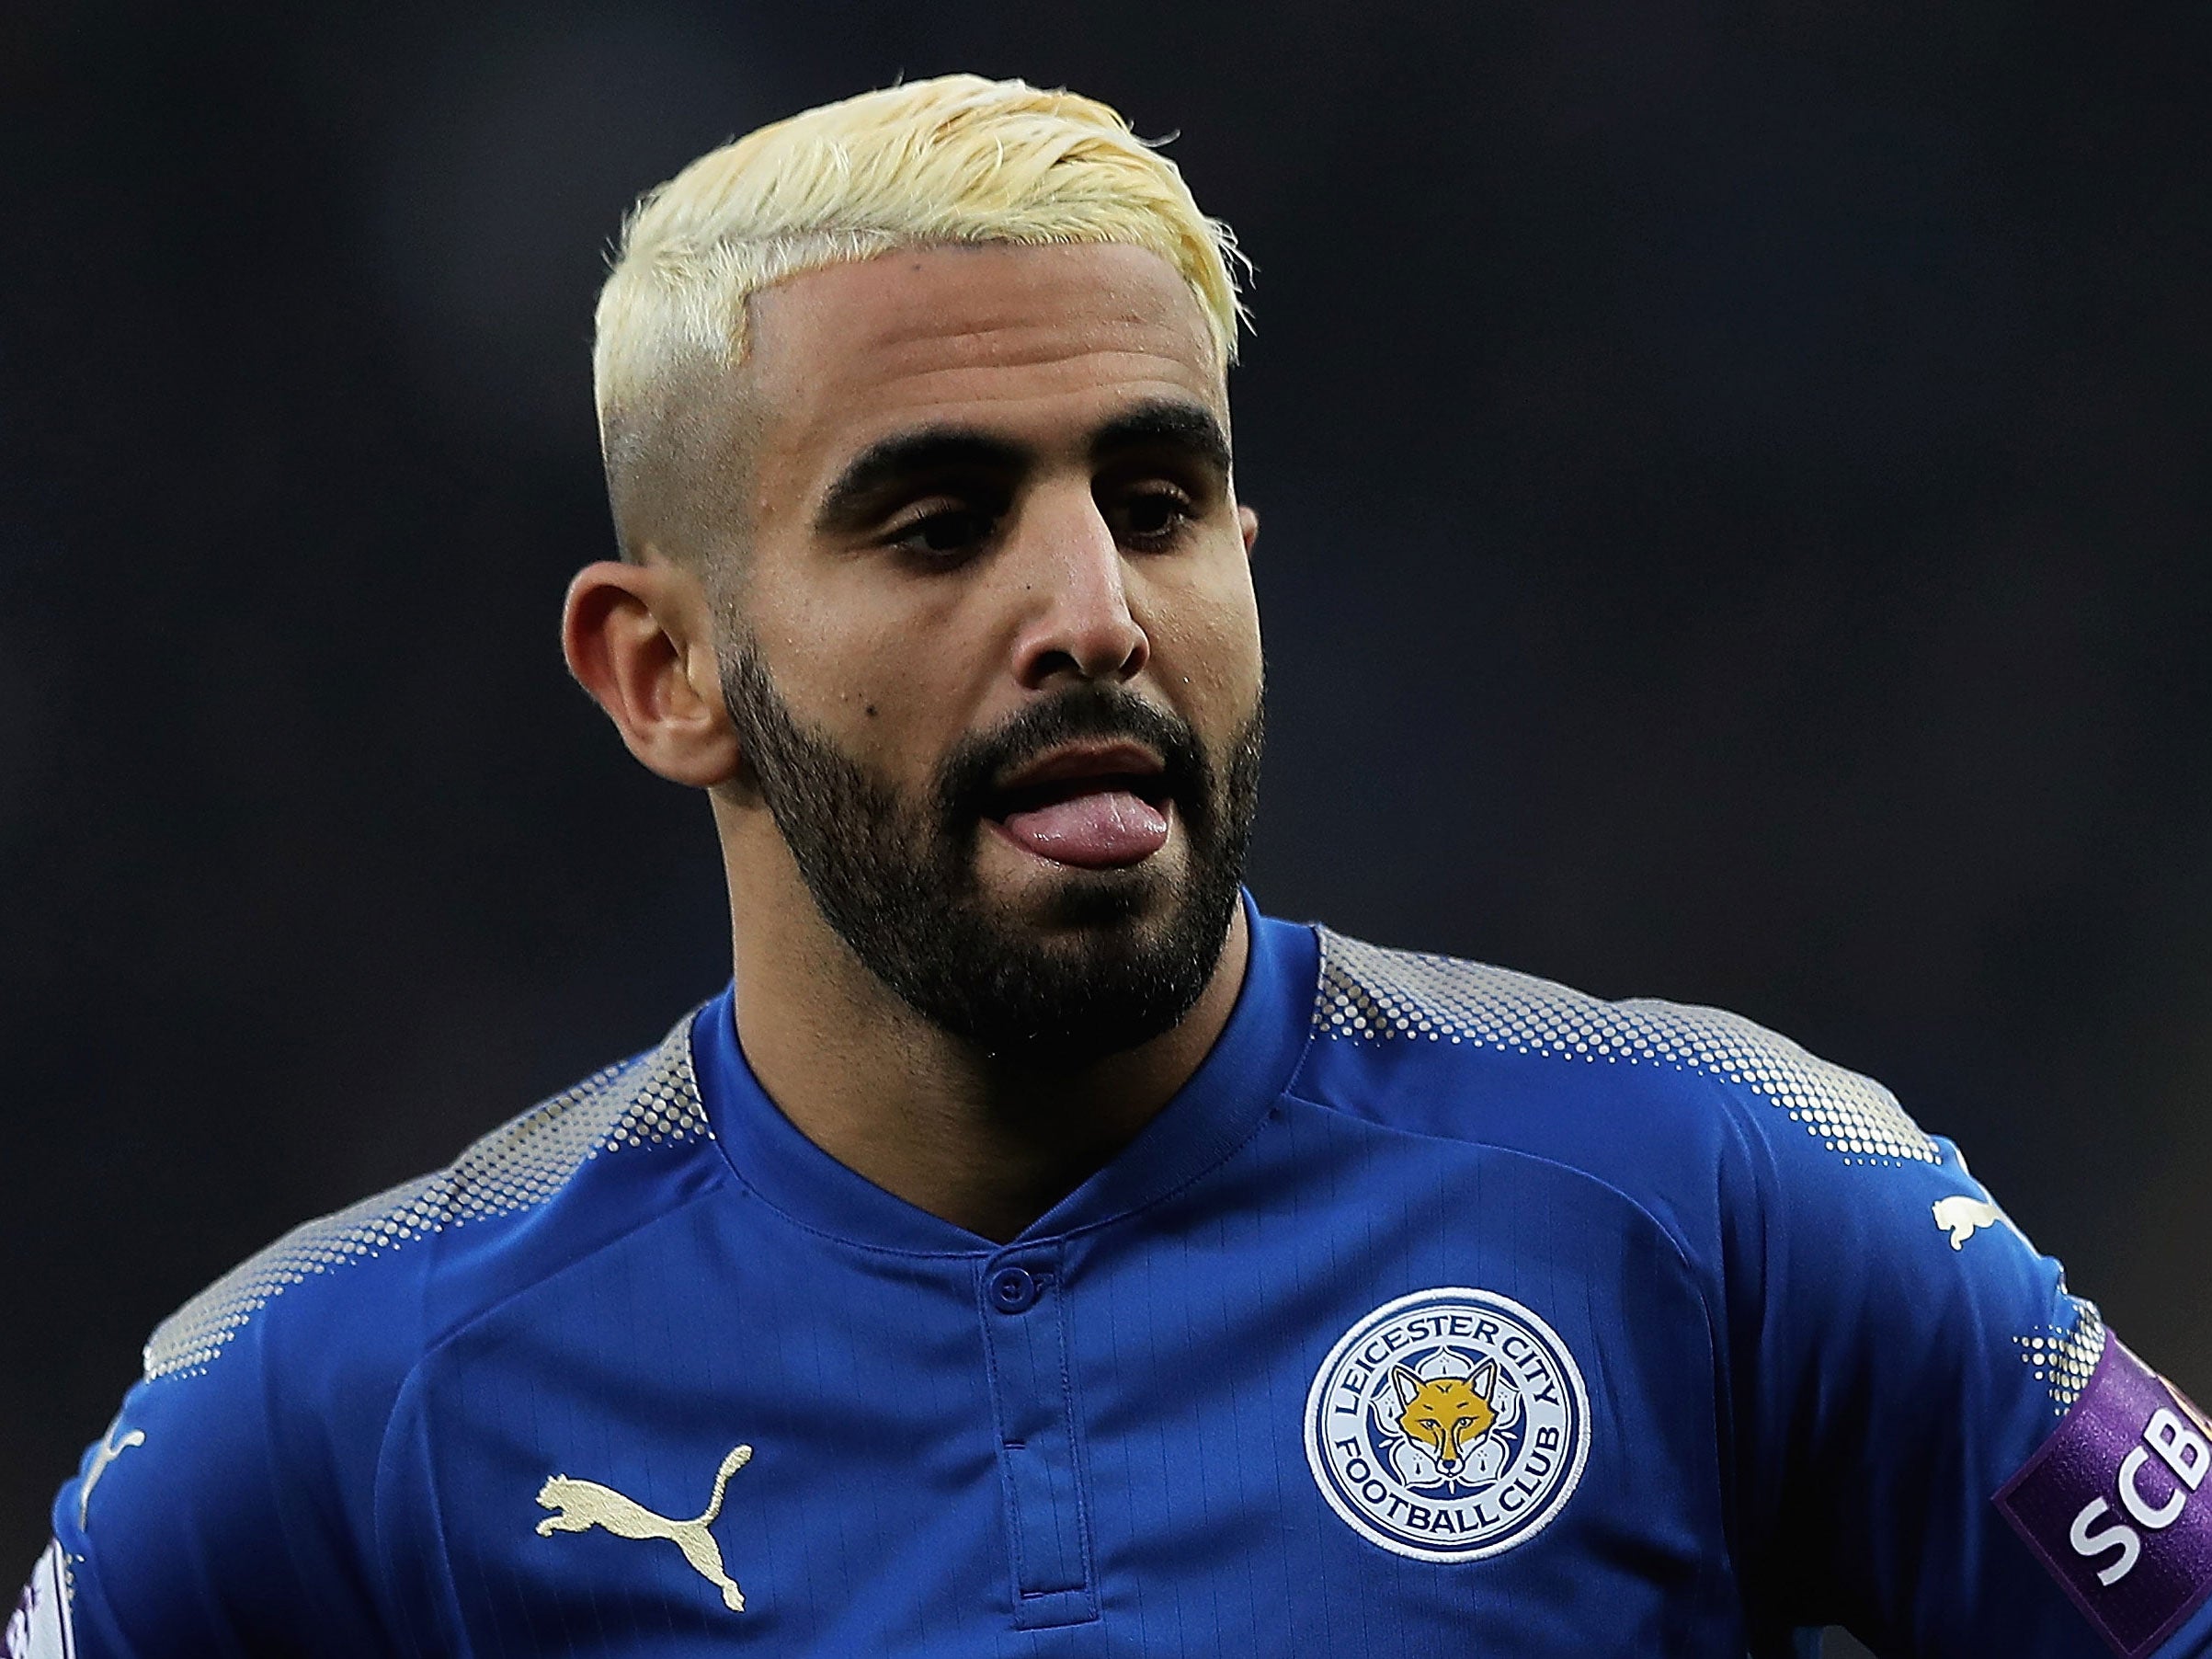 Mahrez pushed to leave Leicester in January